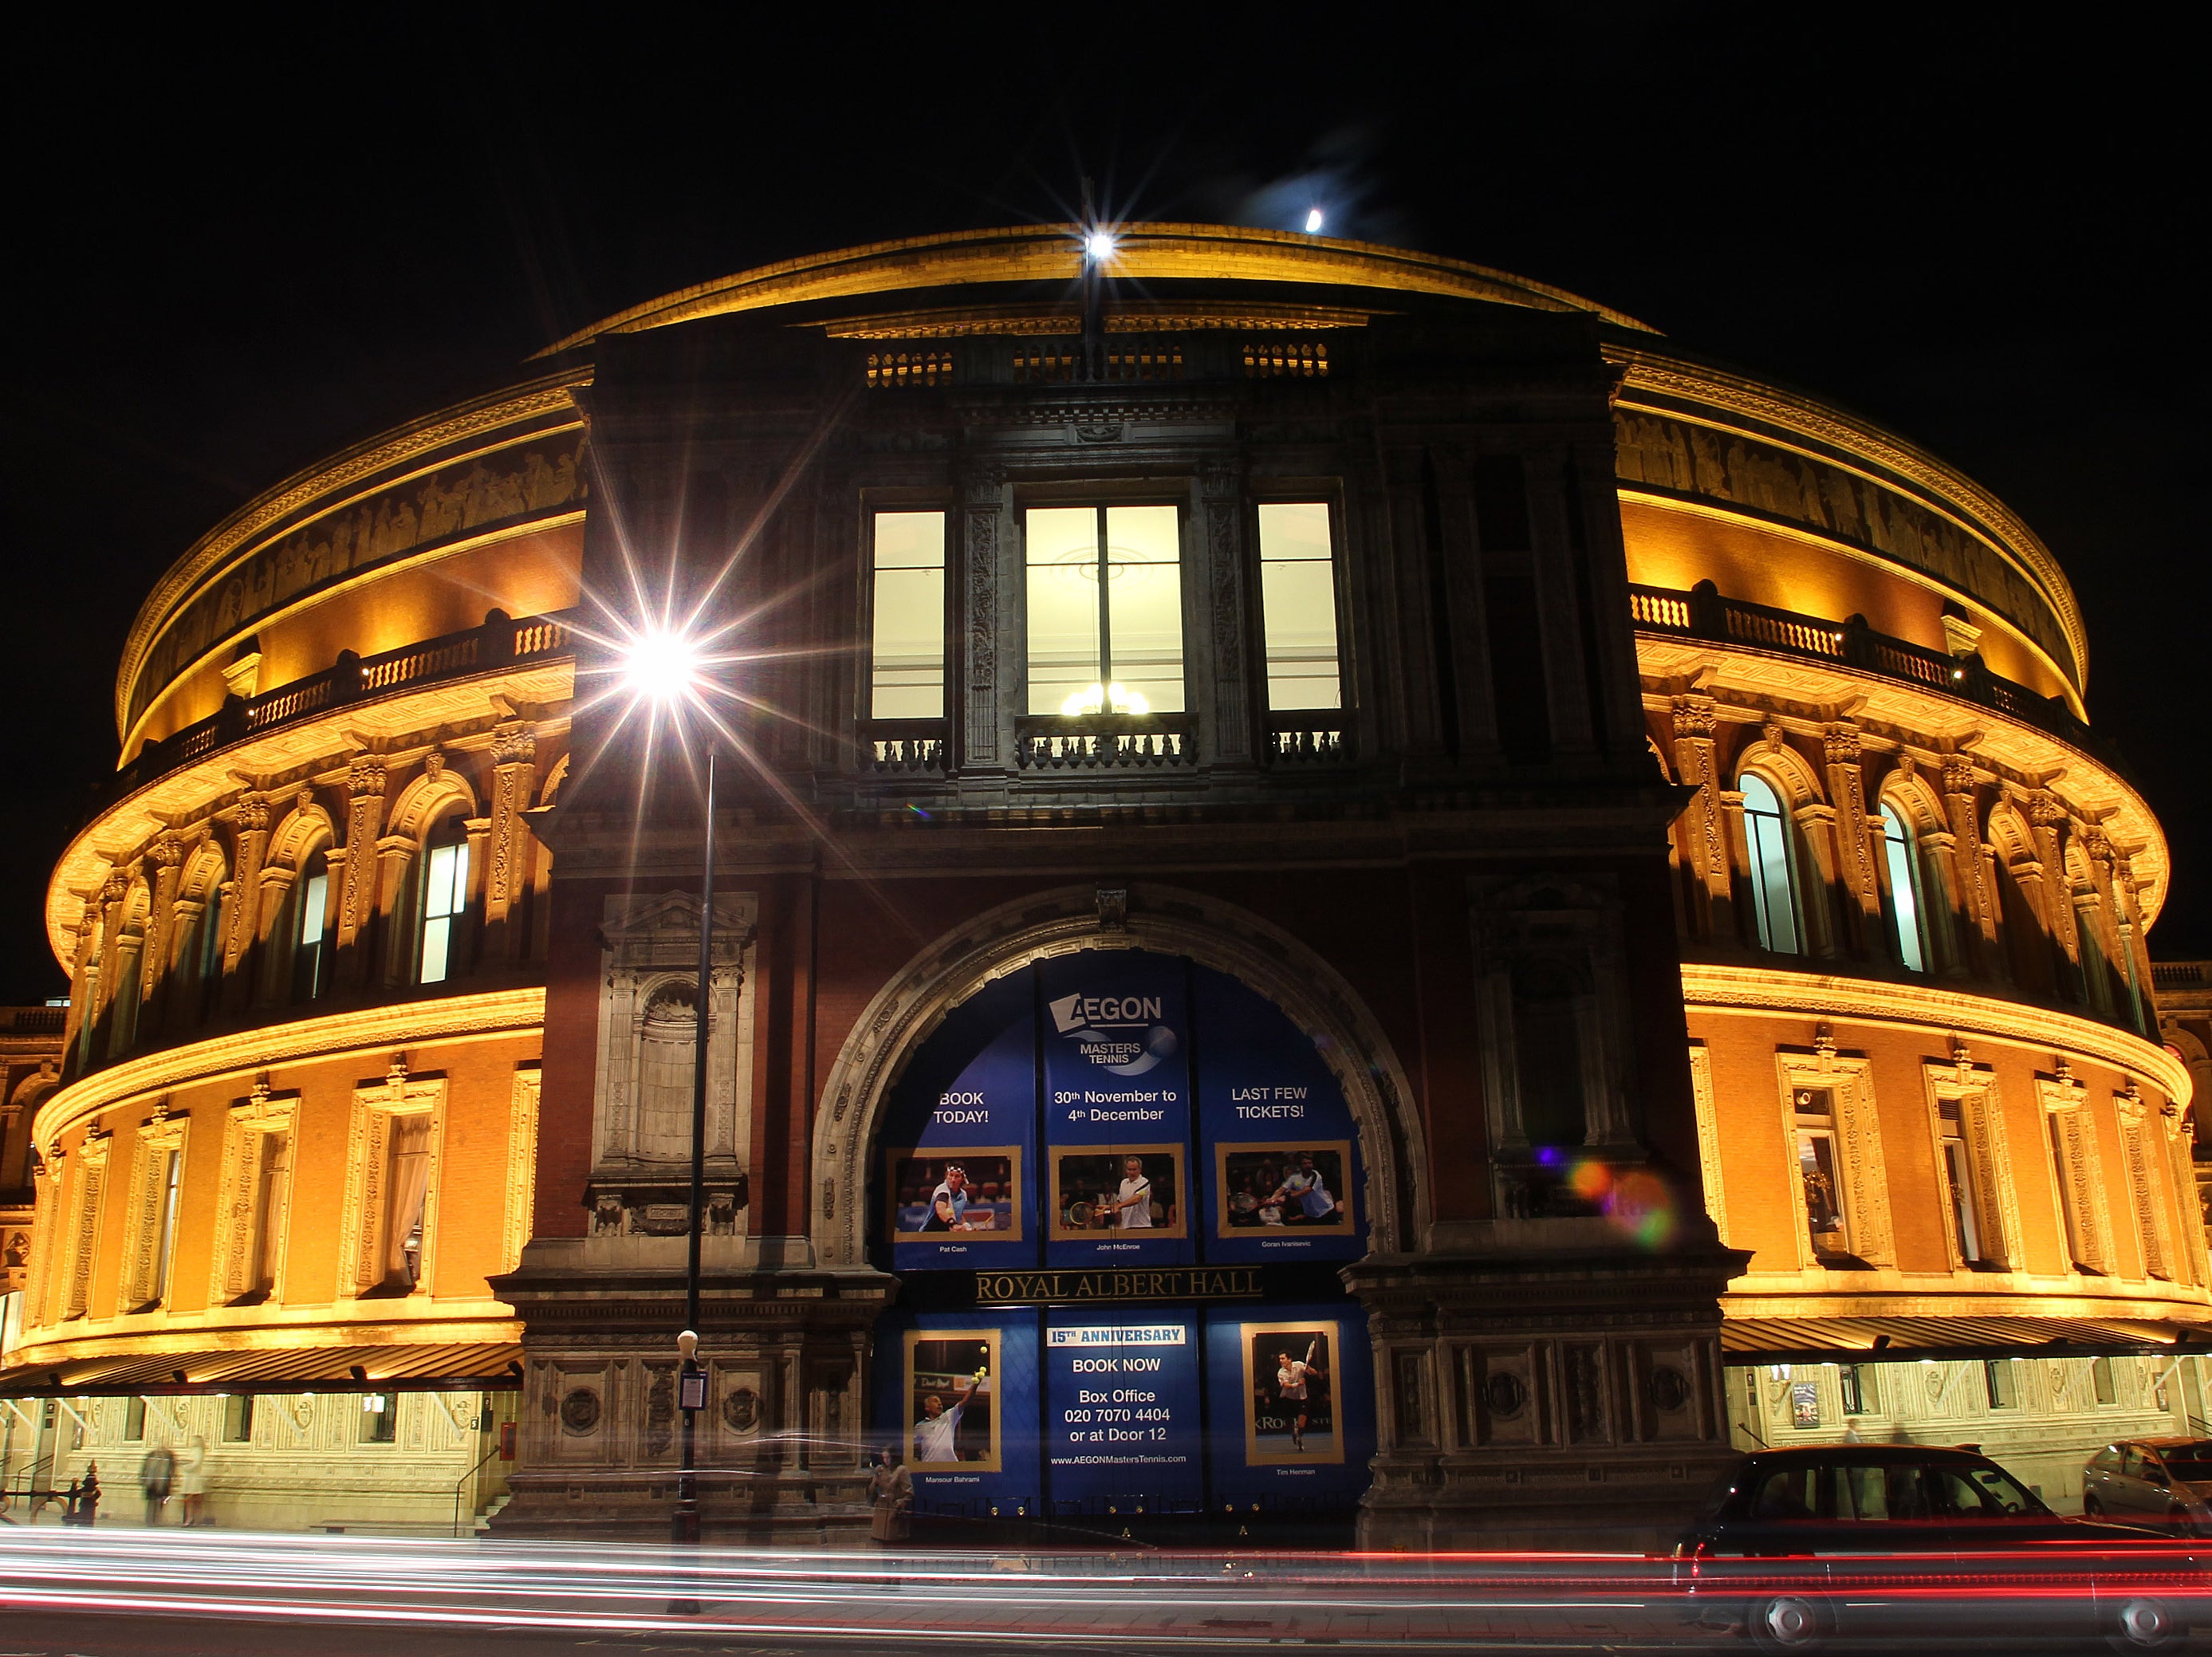 The exterior of the Royal Albert Hall